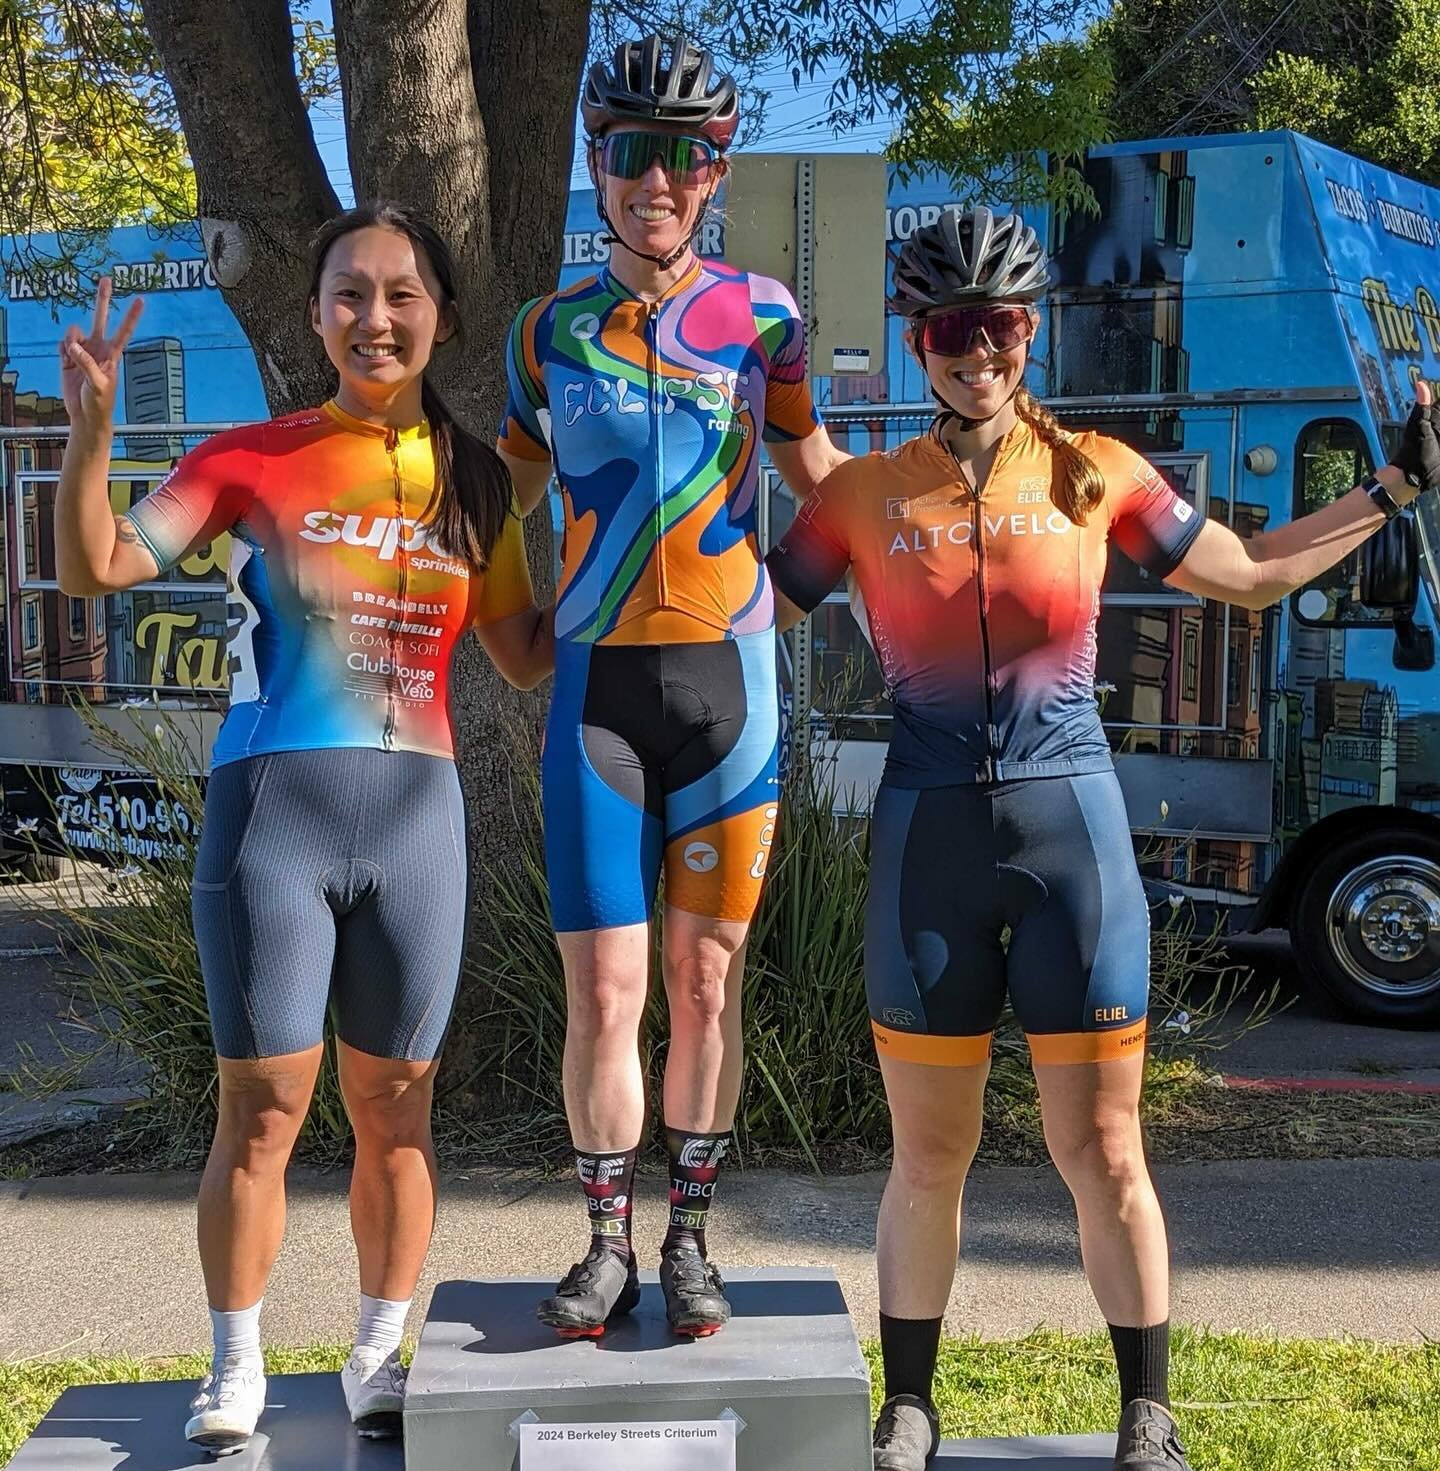 Congratulations to Stephanie for cranking out a W 🥇 at the @berkeleybike criterium this weekend and coming in 🥈 for the overall omnium.

The team came out to line up at the start and on the course. 🦺 We love a local race!